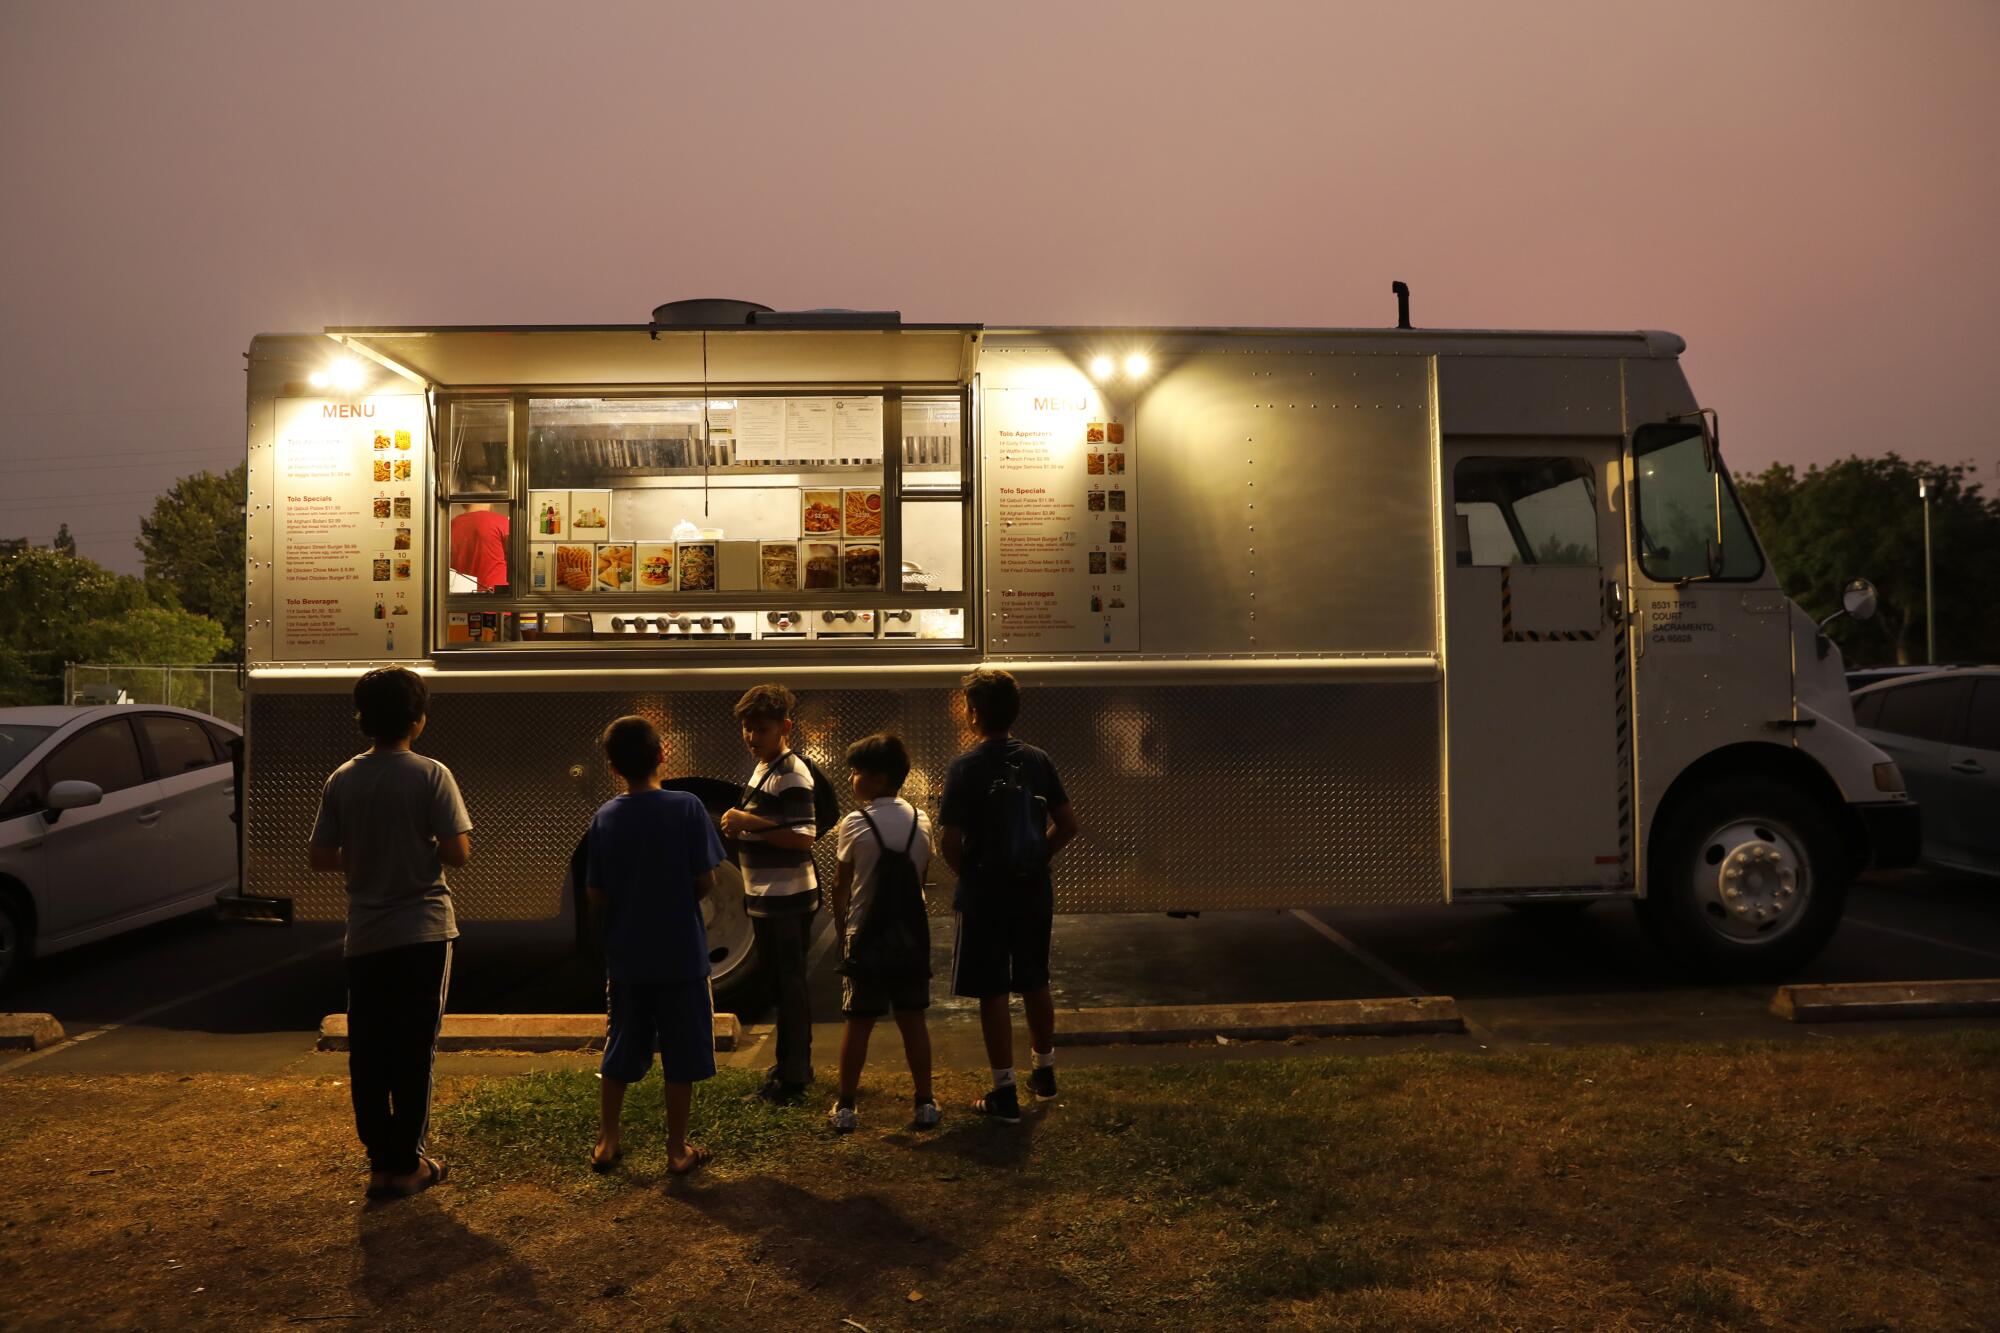 Children gathered at a food truck